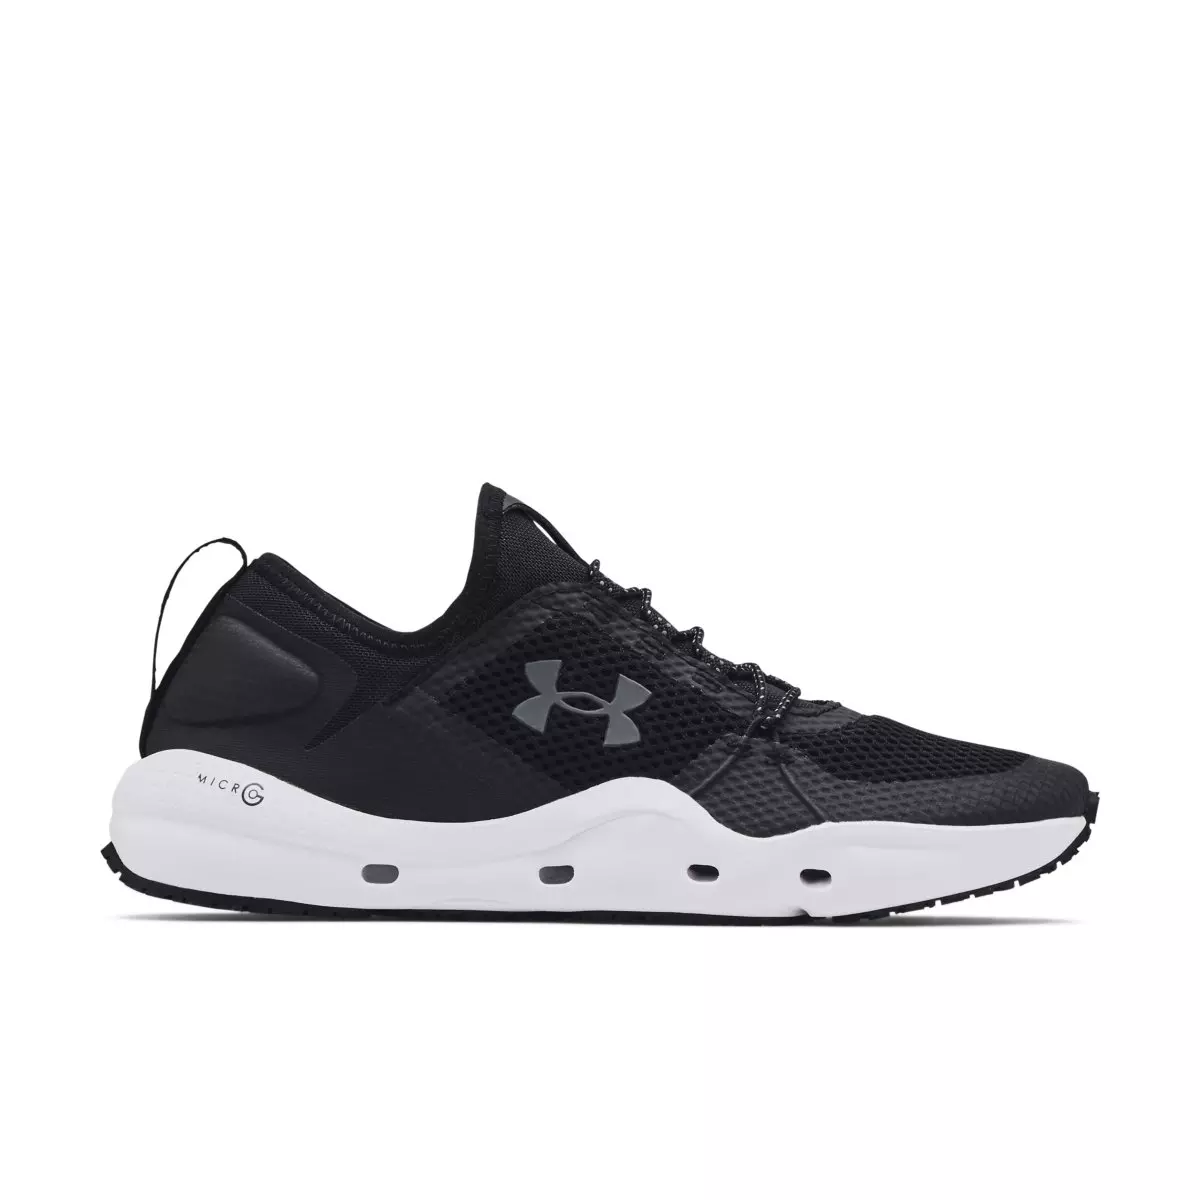 Under armour micro g Kilchis water/fishing shoes, Men's Fashion